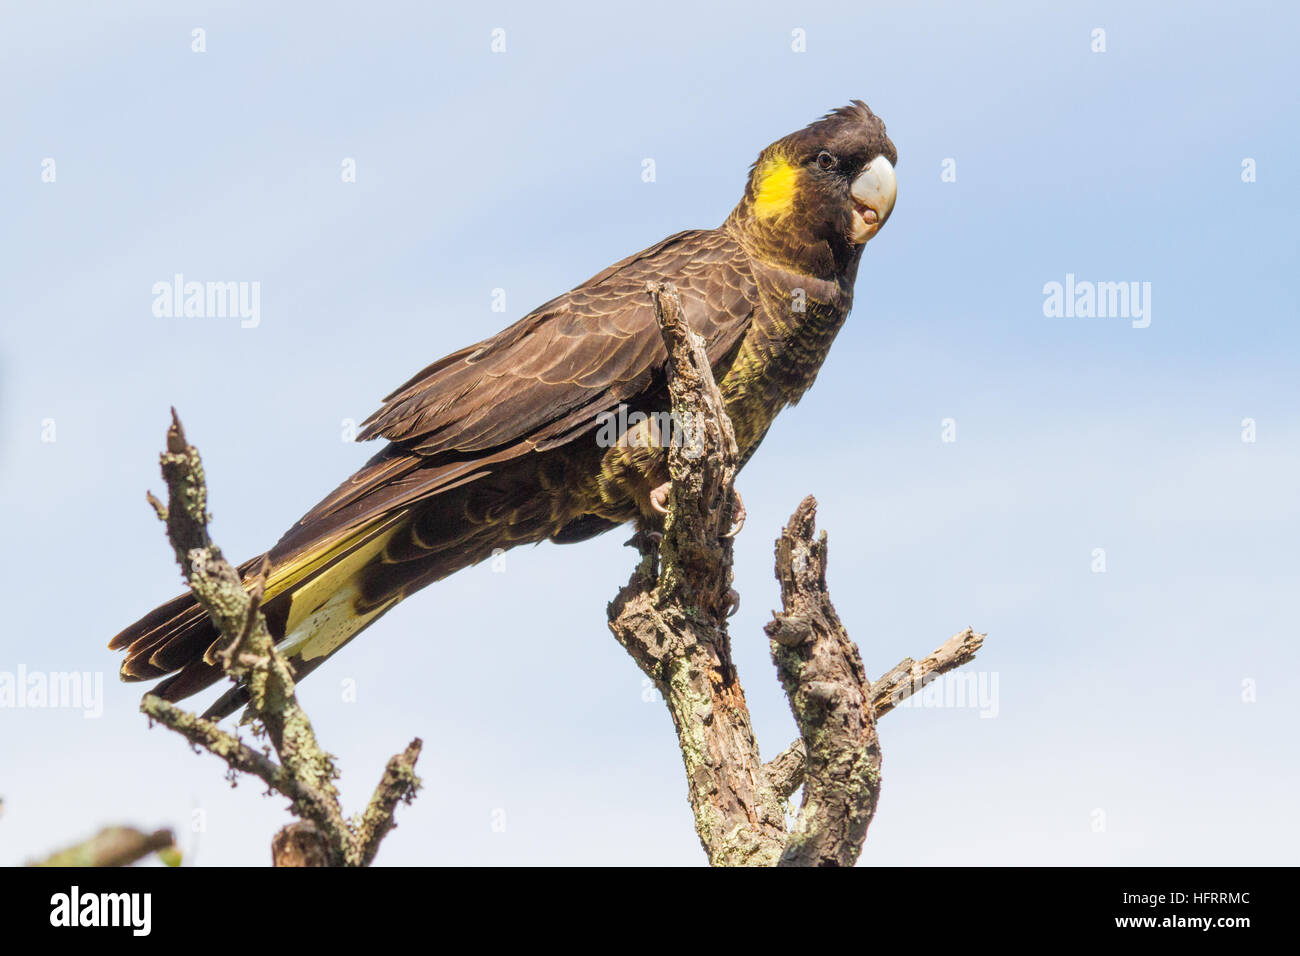 Yellow-tailed black cockatoo (Calyptorhynchus funereus) perched on a branch Stock Photo